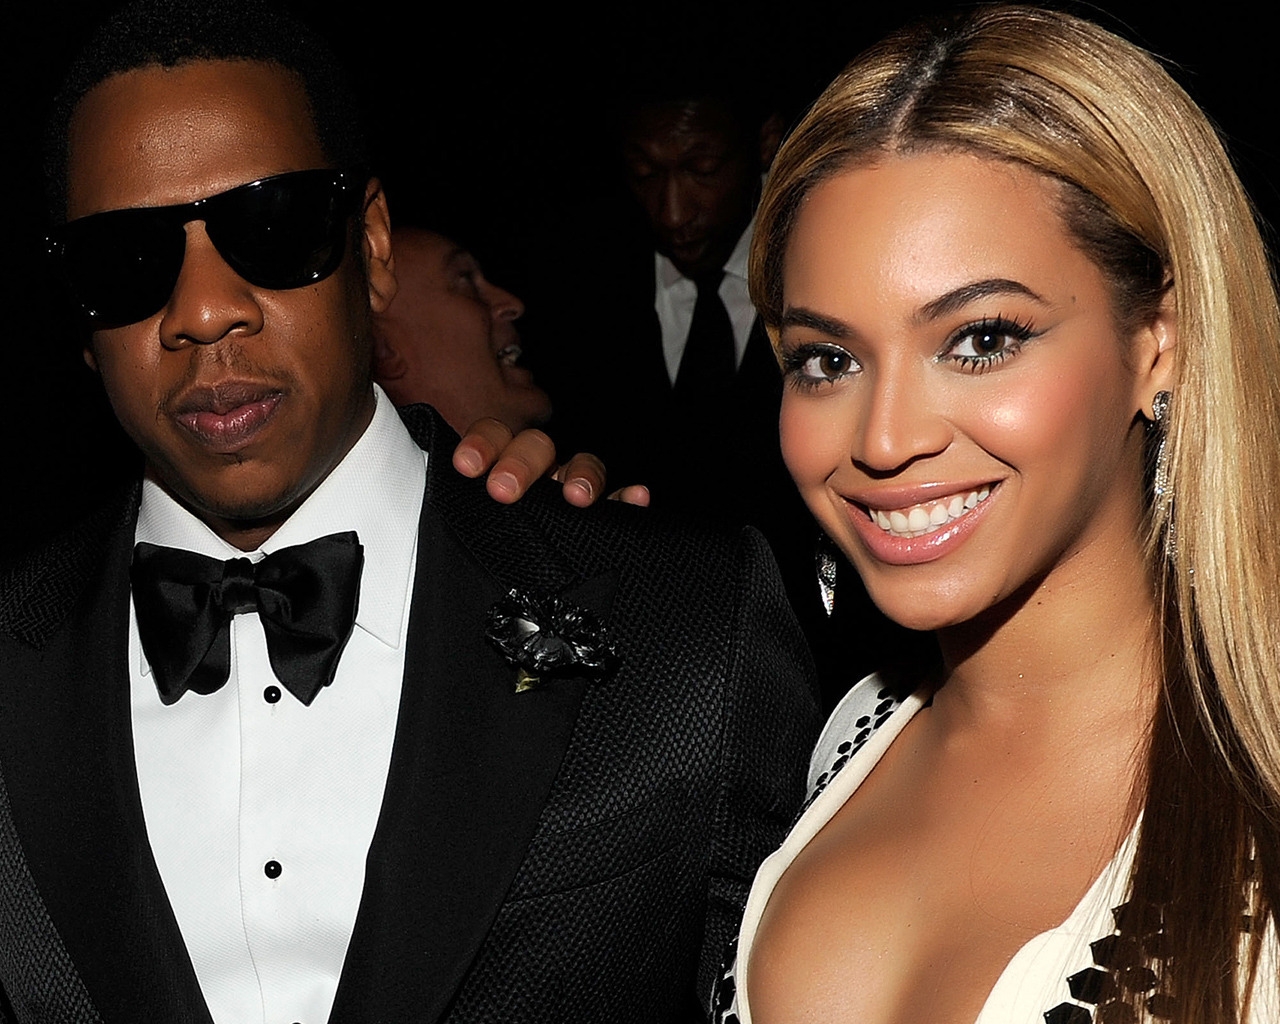 Jay Z and Beyonce for 1280 x 1024 resolution